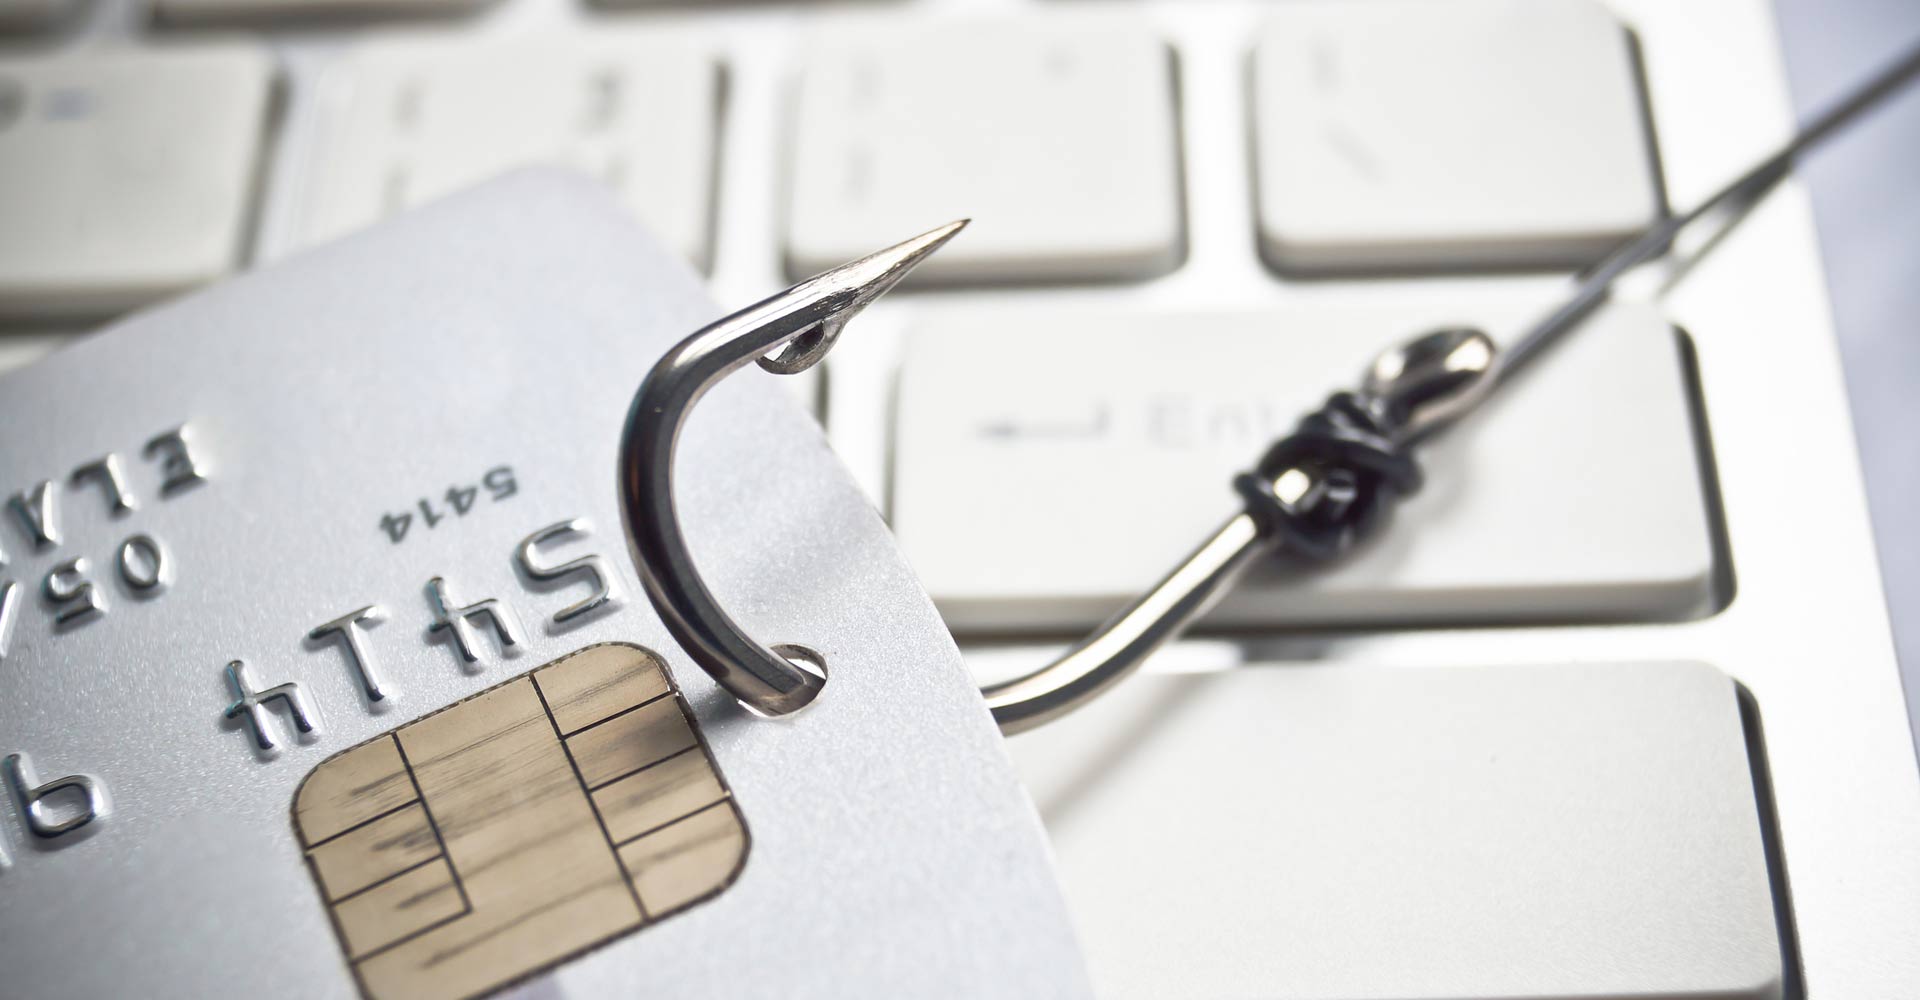 The easy way to protect yourself from almost all phishing scams